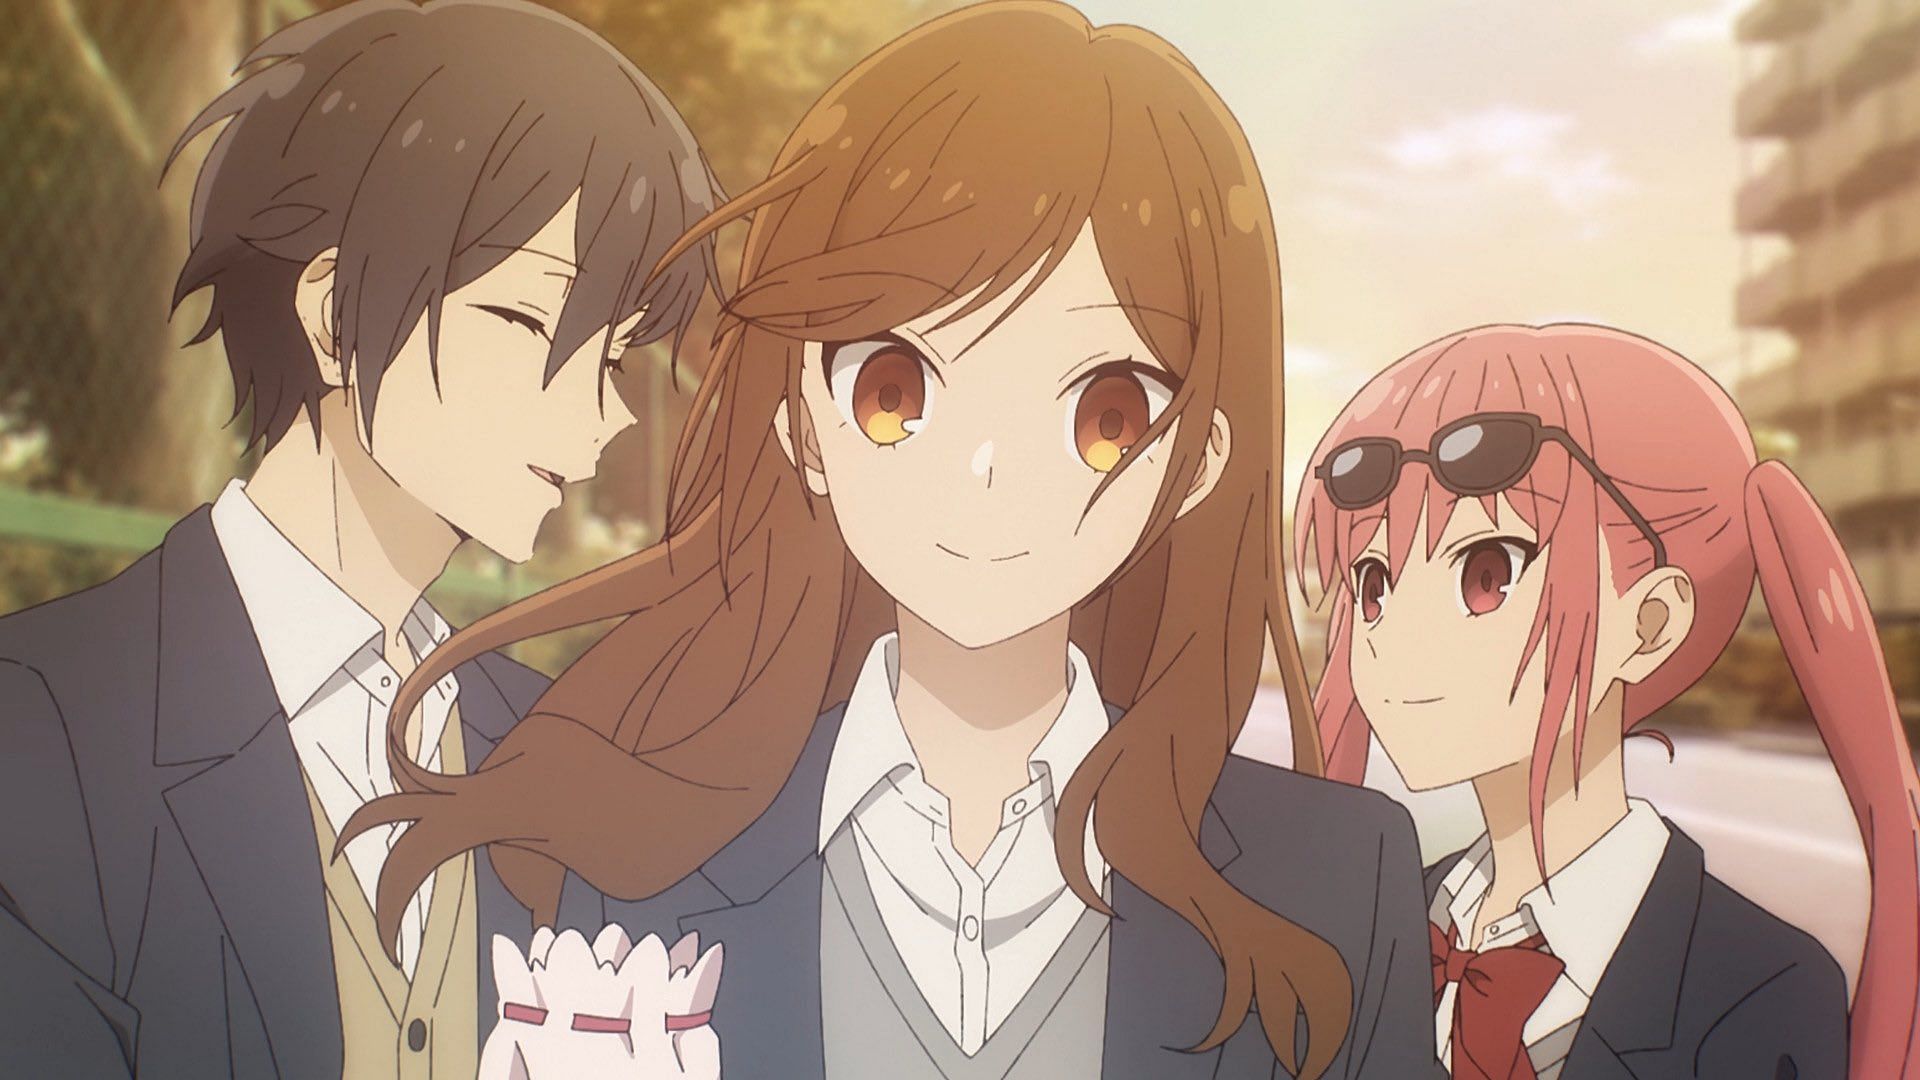 Horimiya: The Missing Pieces Episode 10 Review - But Why Tho?